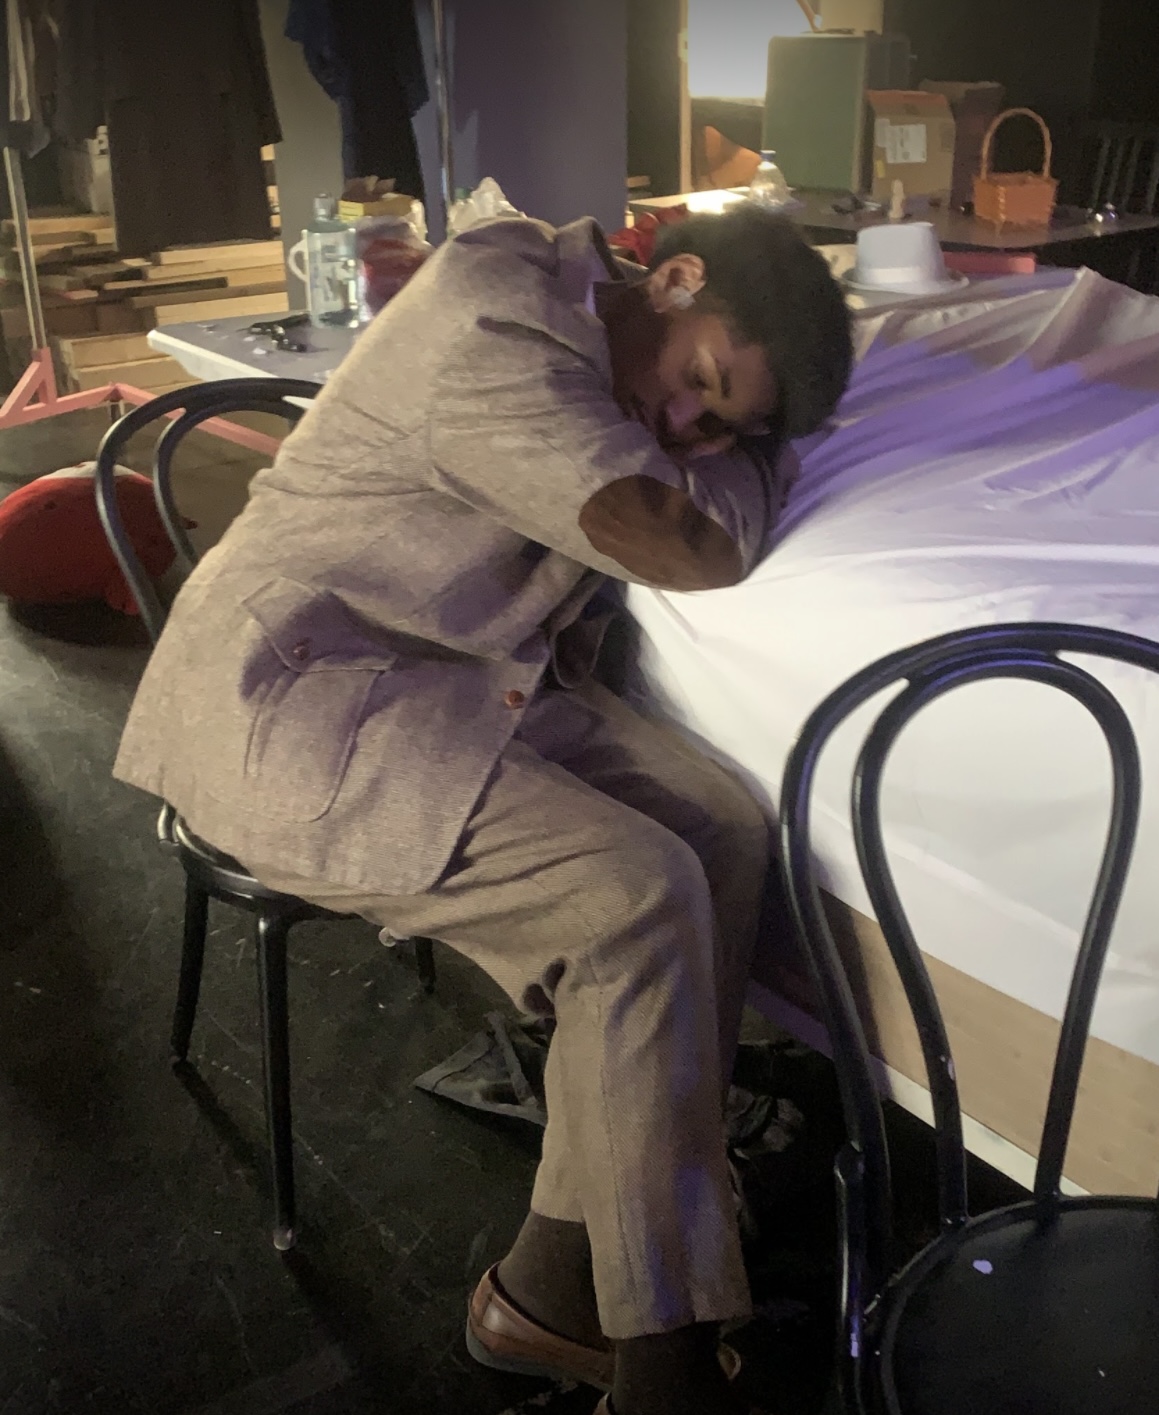 Ronnie Moore (Amos Hart) falls asleep backstage on the bed donated by our tech director Springs. Sleep tight Mister Cellophane!